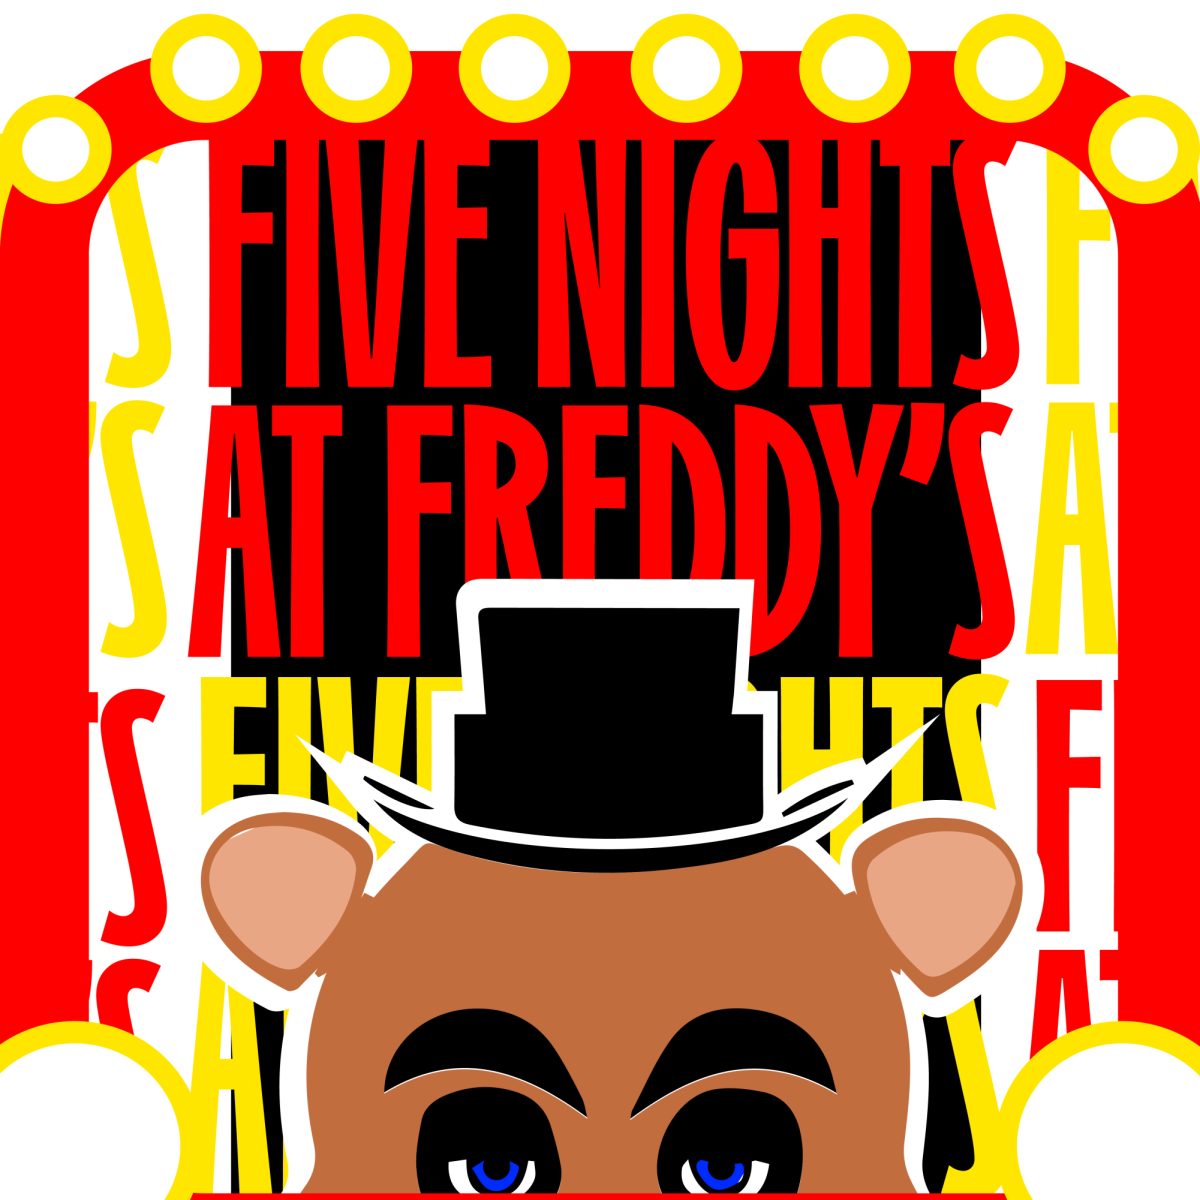 The Five Nights at Freddys movie has been overly criticized